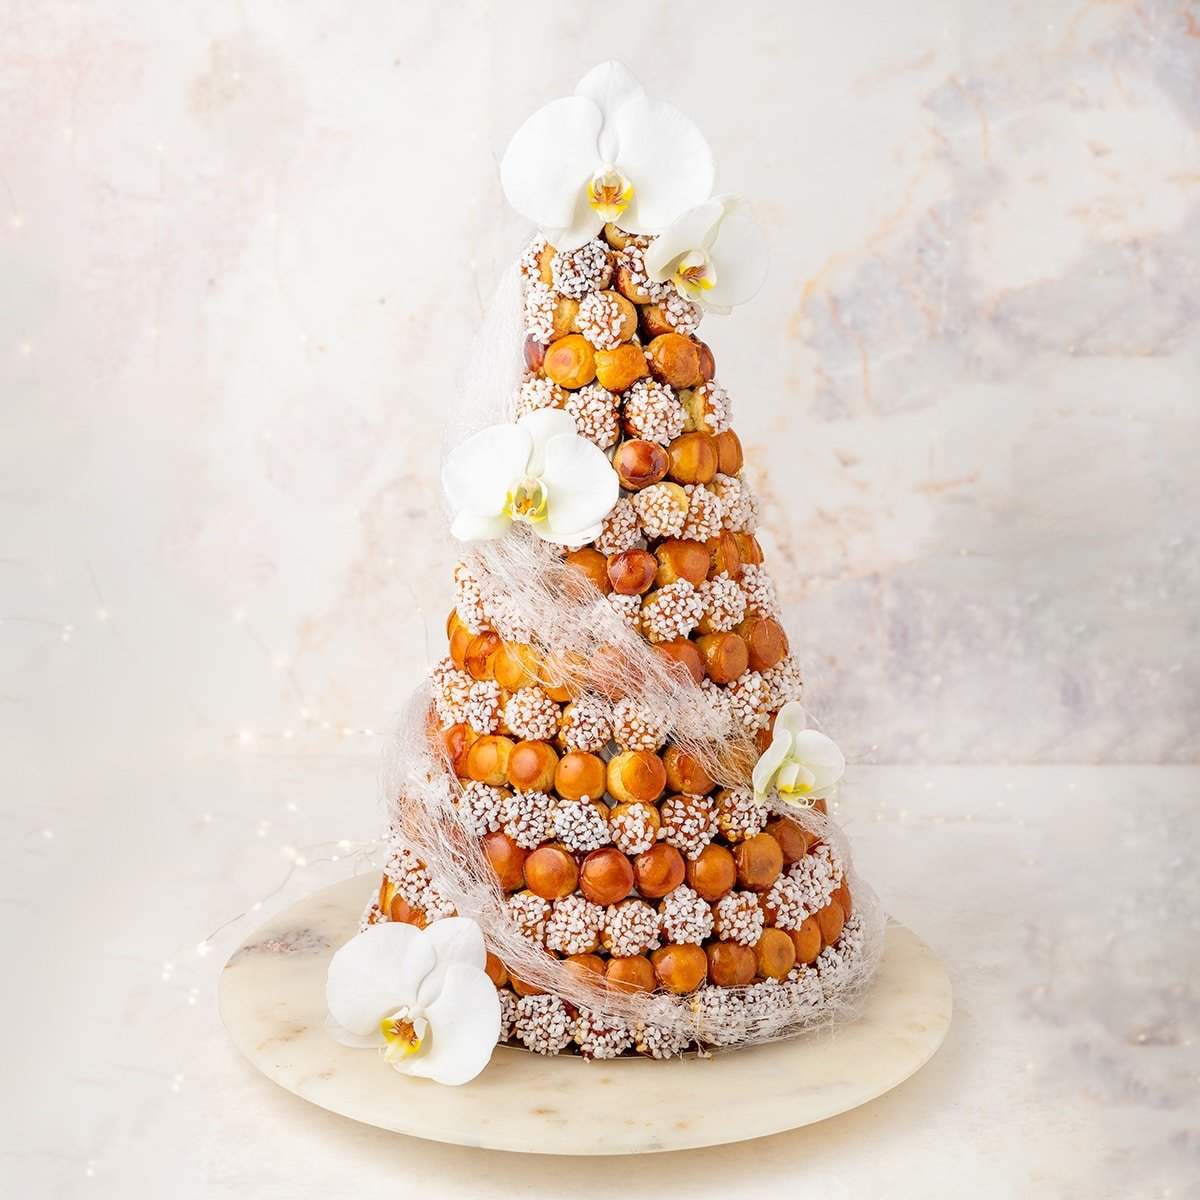 wedding cream puff tower stacked on top of a marble plate in front of white background